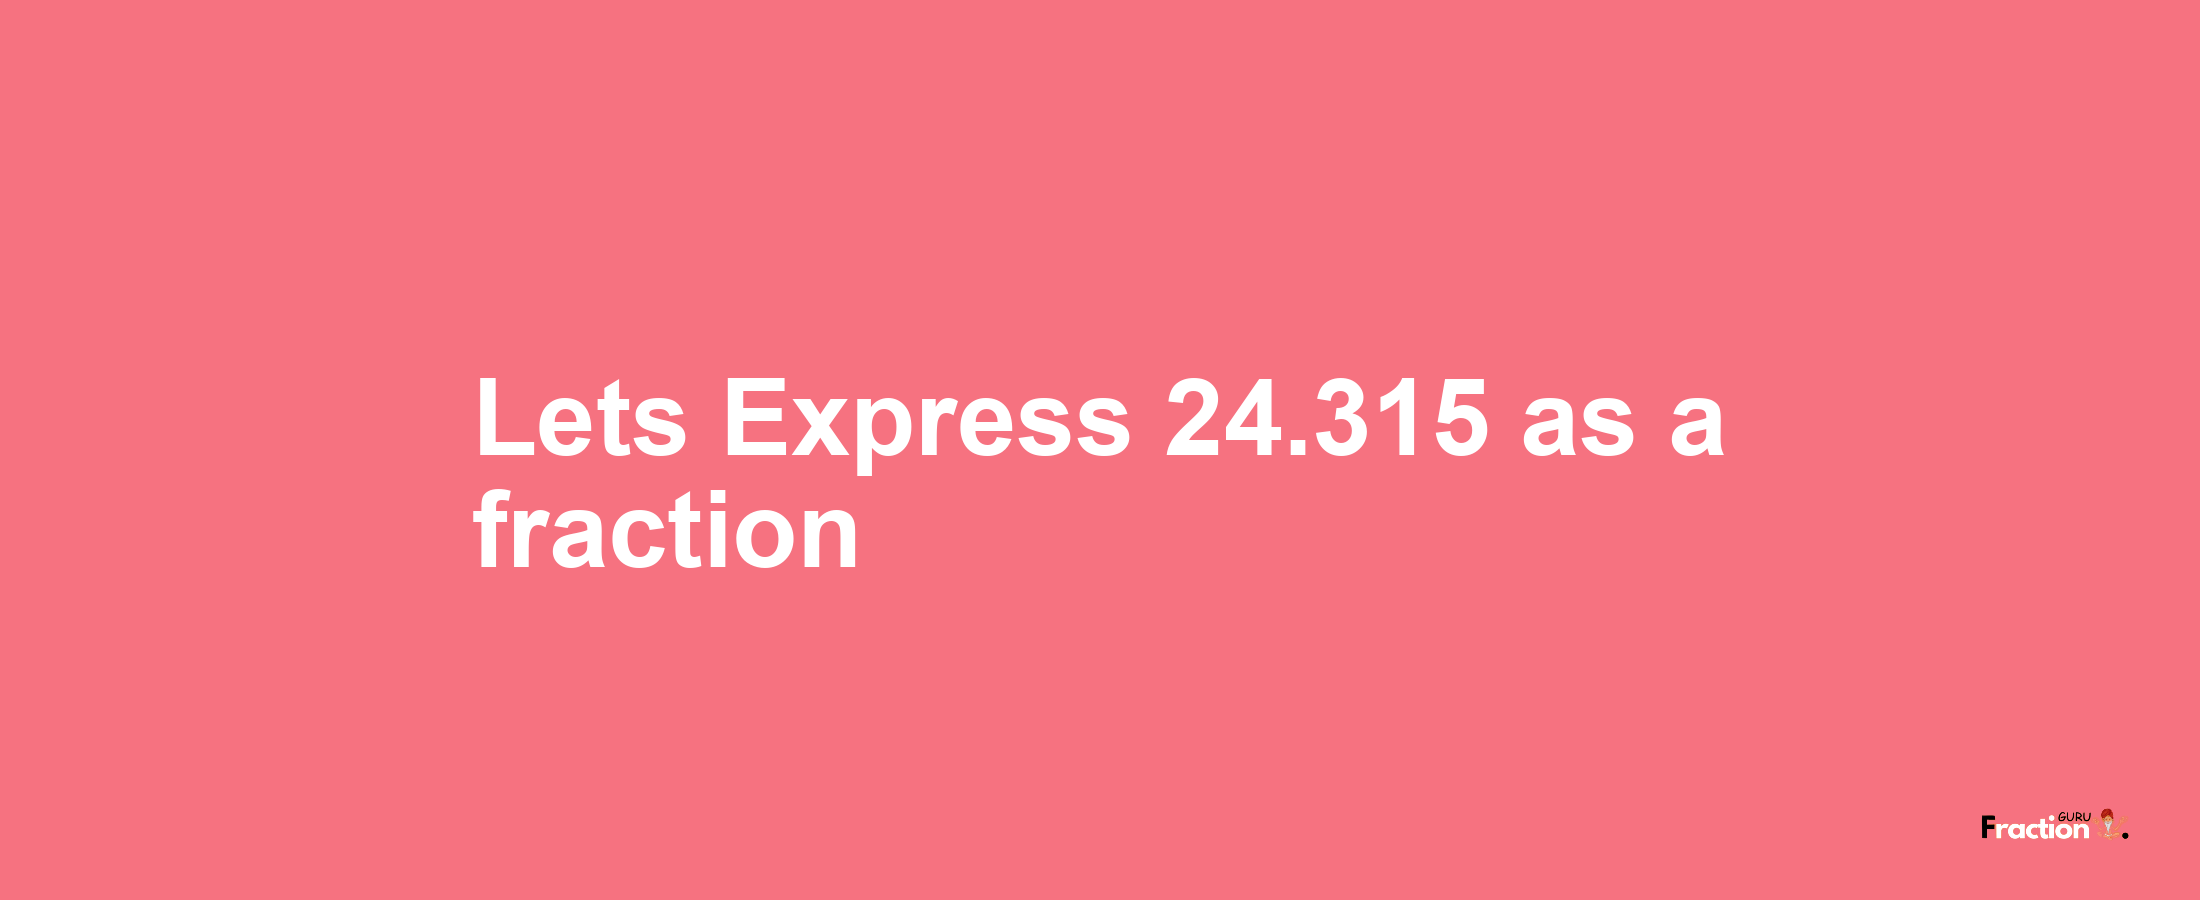 Lets Express 24.315 as afraction